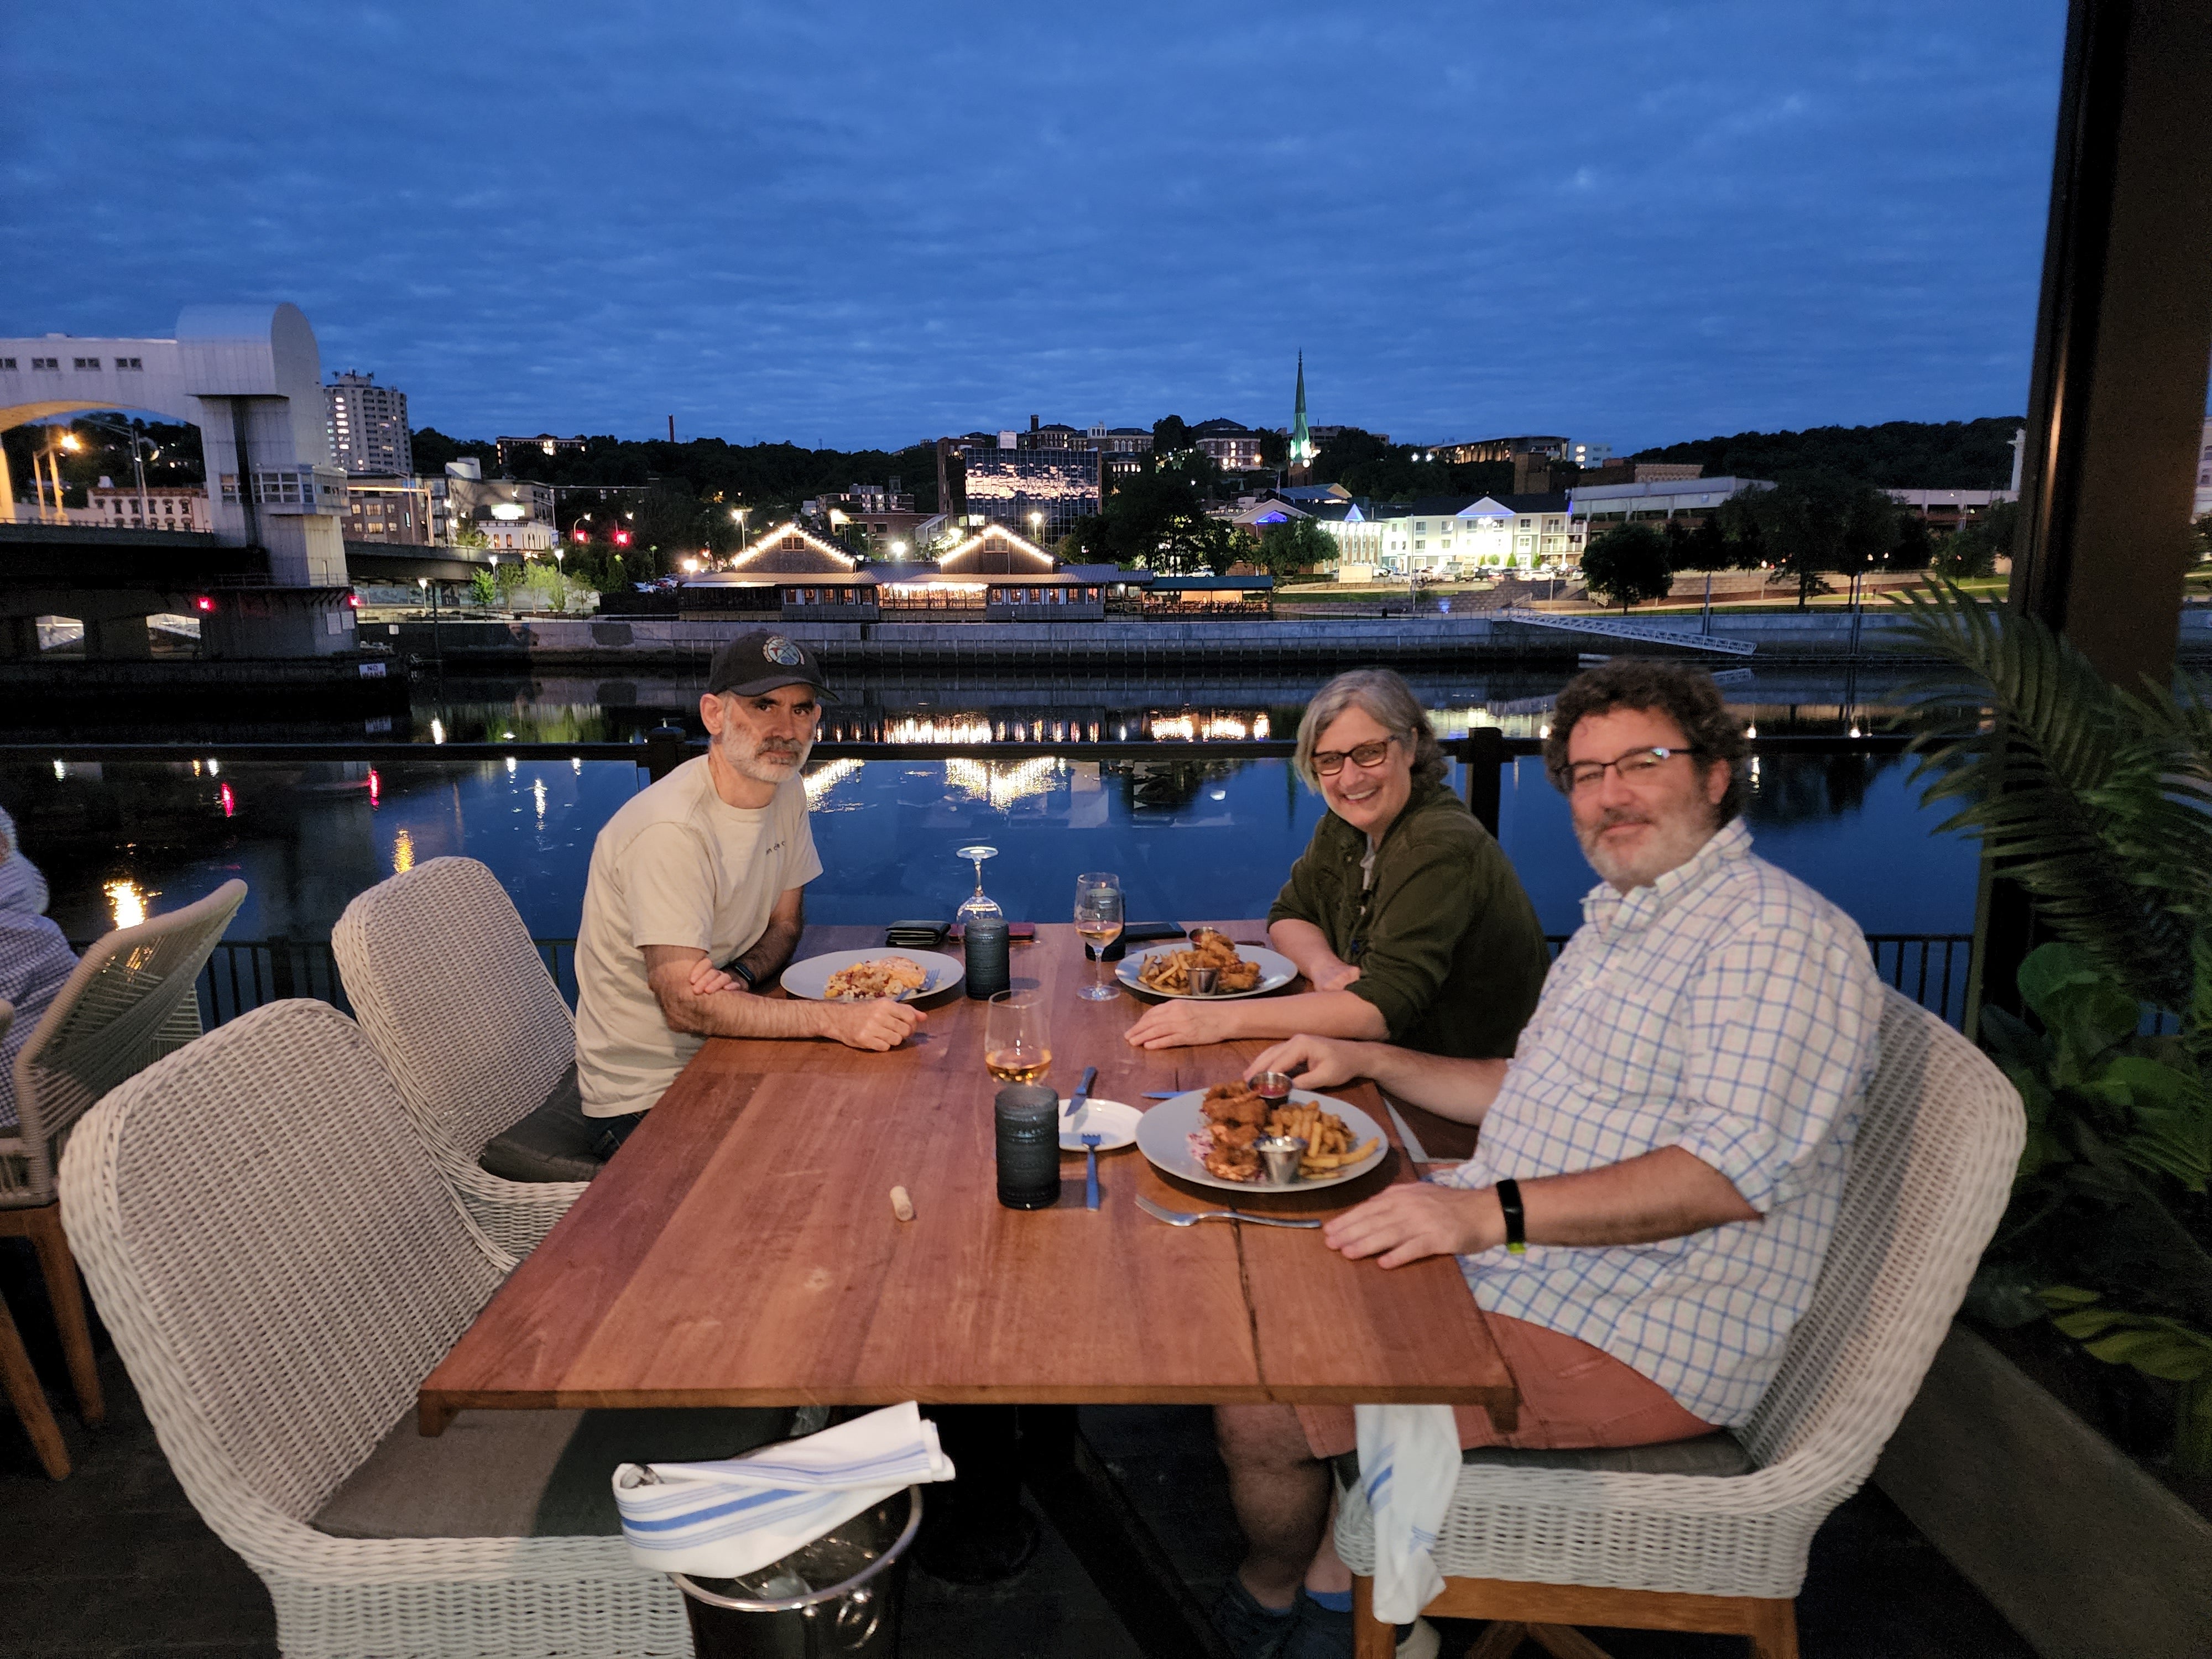 An Image of Drs. Michalet, Barroso and Intes (Left to Right) at Dinner